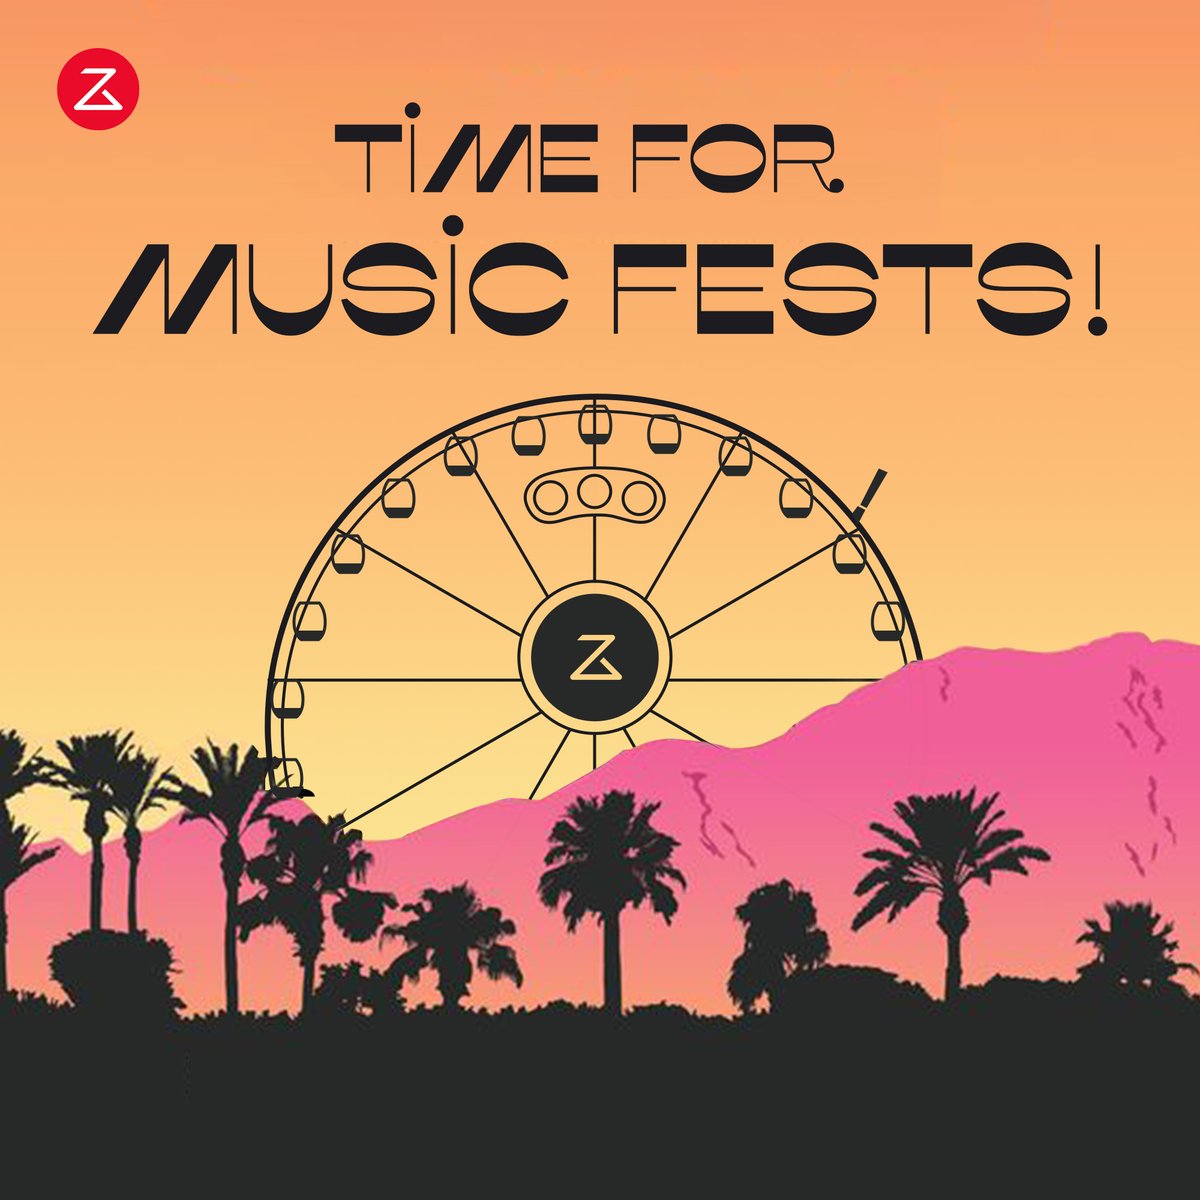 🎶 Let the music festival season begin! 🎡 Who's your ultimate fest guest? While you're out soaking up the beats, let Roborock keep your home in tune with its scheduling function. No need to miss a single moment of the fun! #MusicFestival #Roborock #Coachella #SpotlessHome